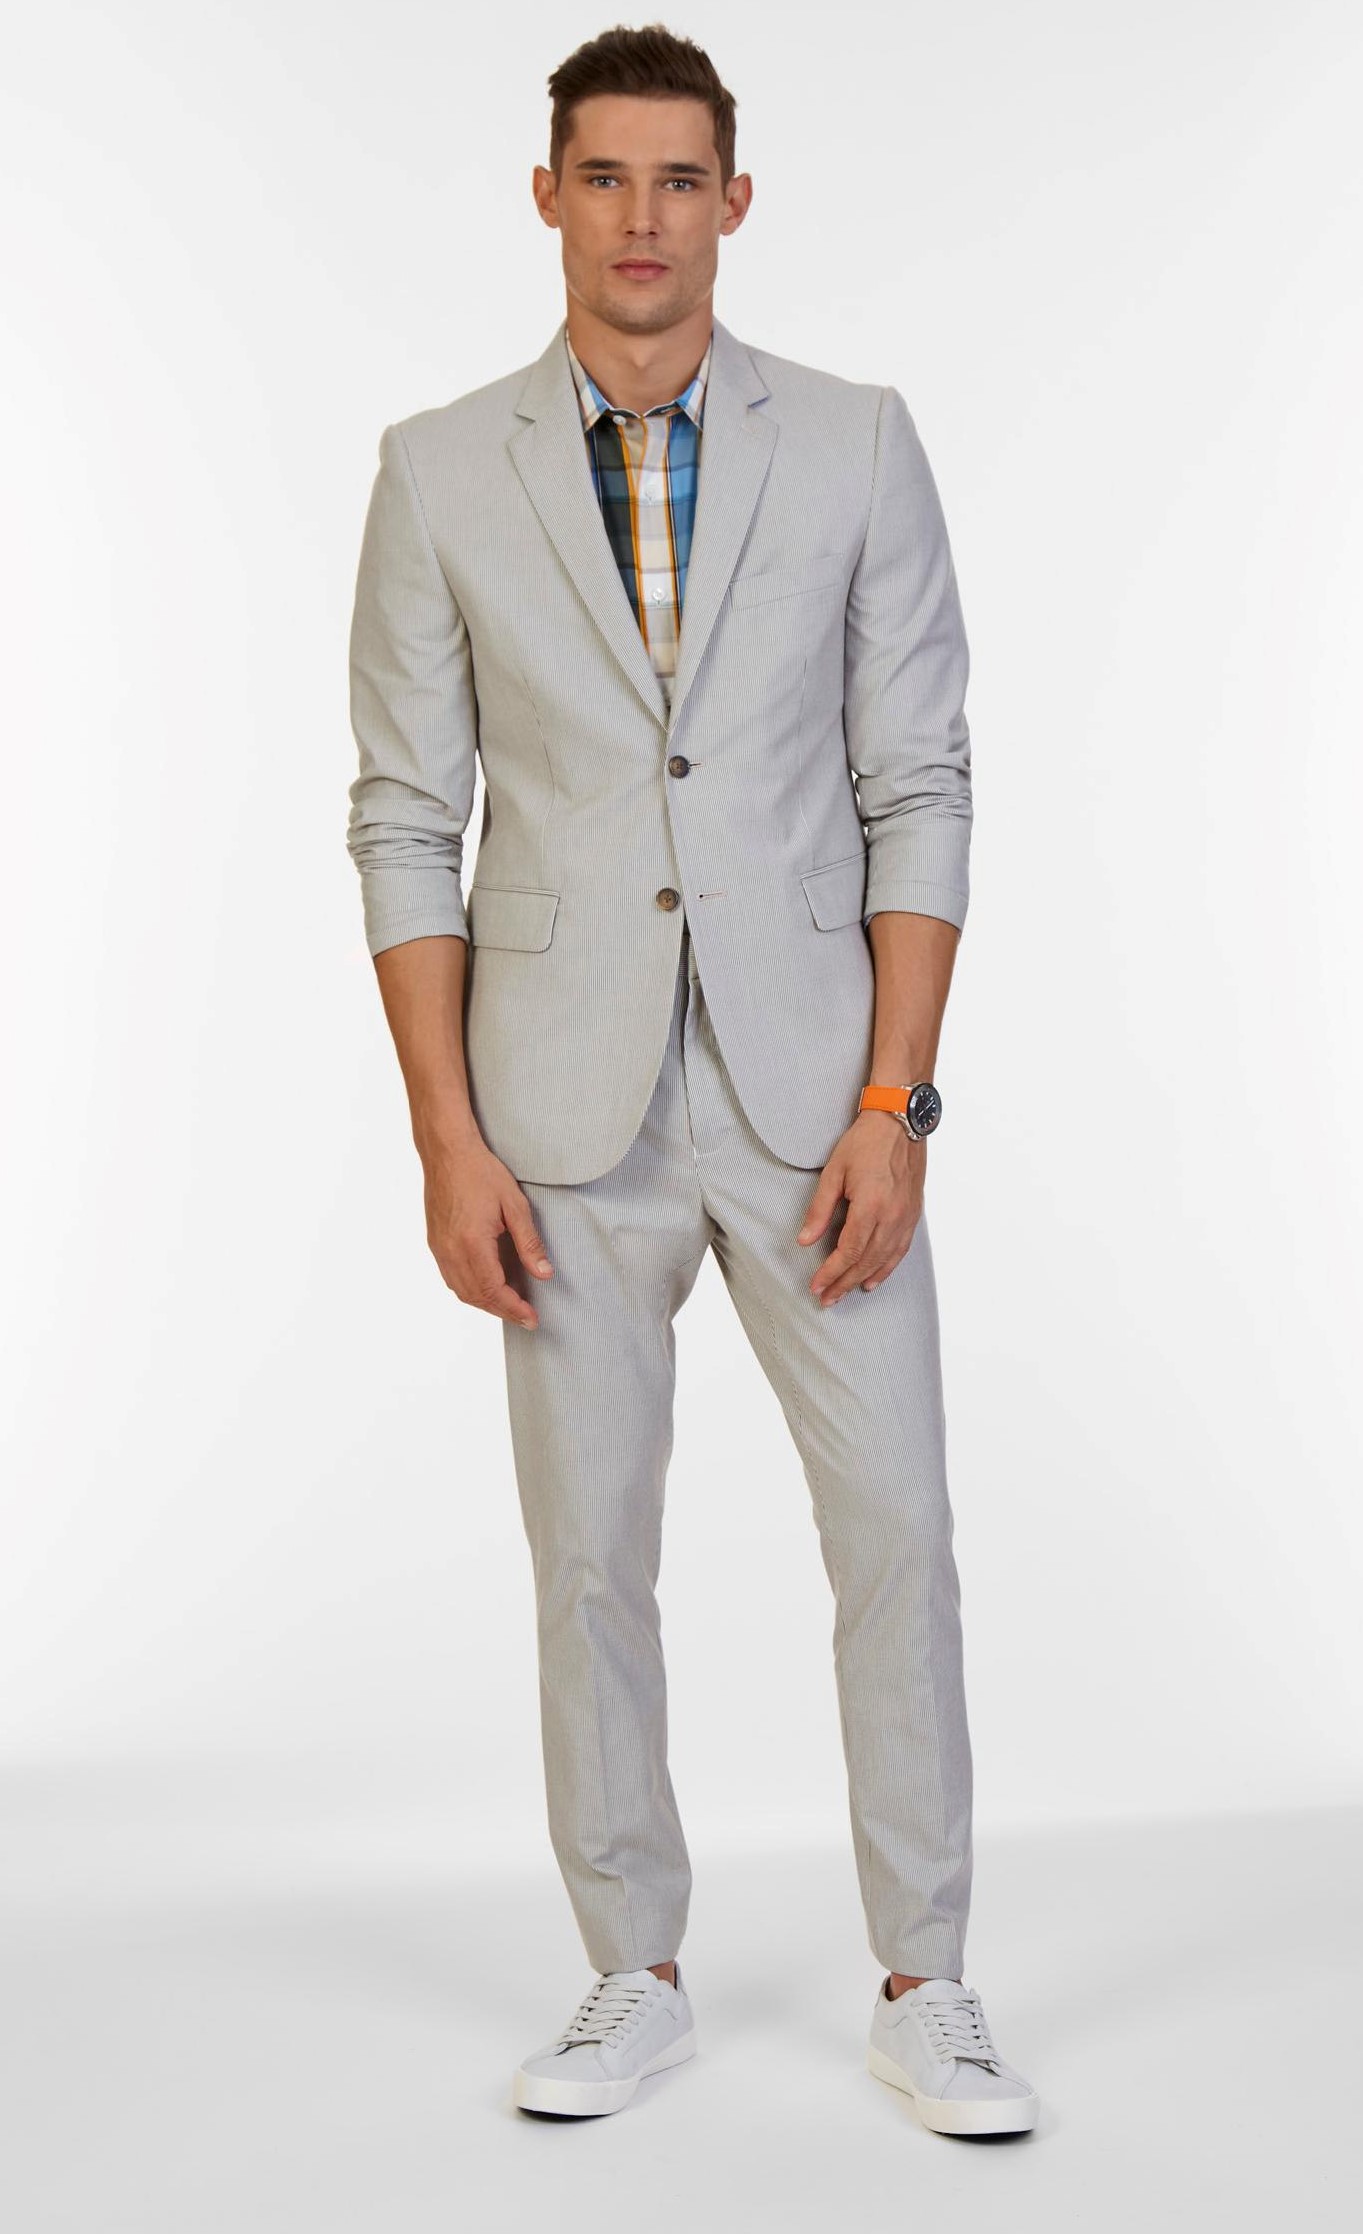 Resort Chic And Beach Wedding Attire For Men 5 Pinoy Guy Guide